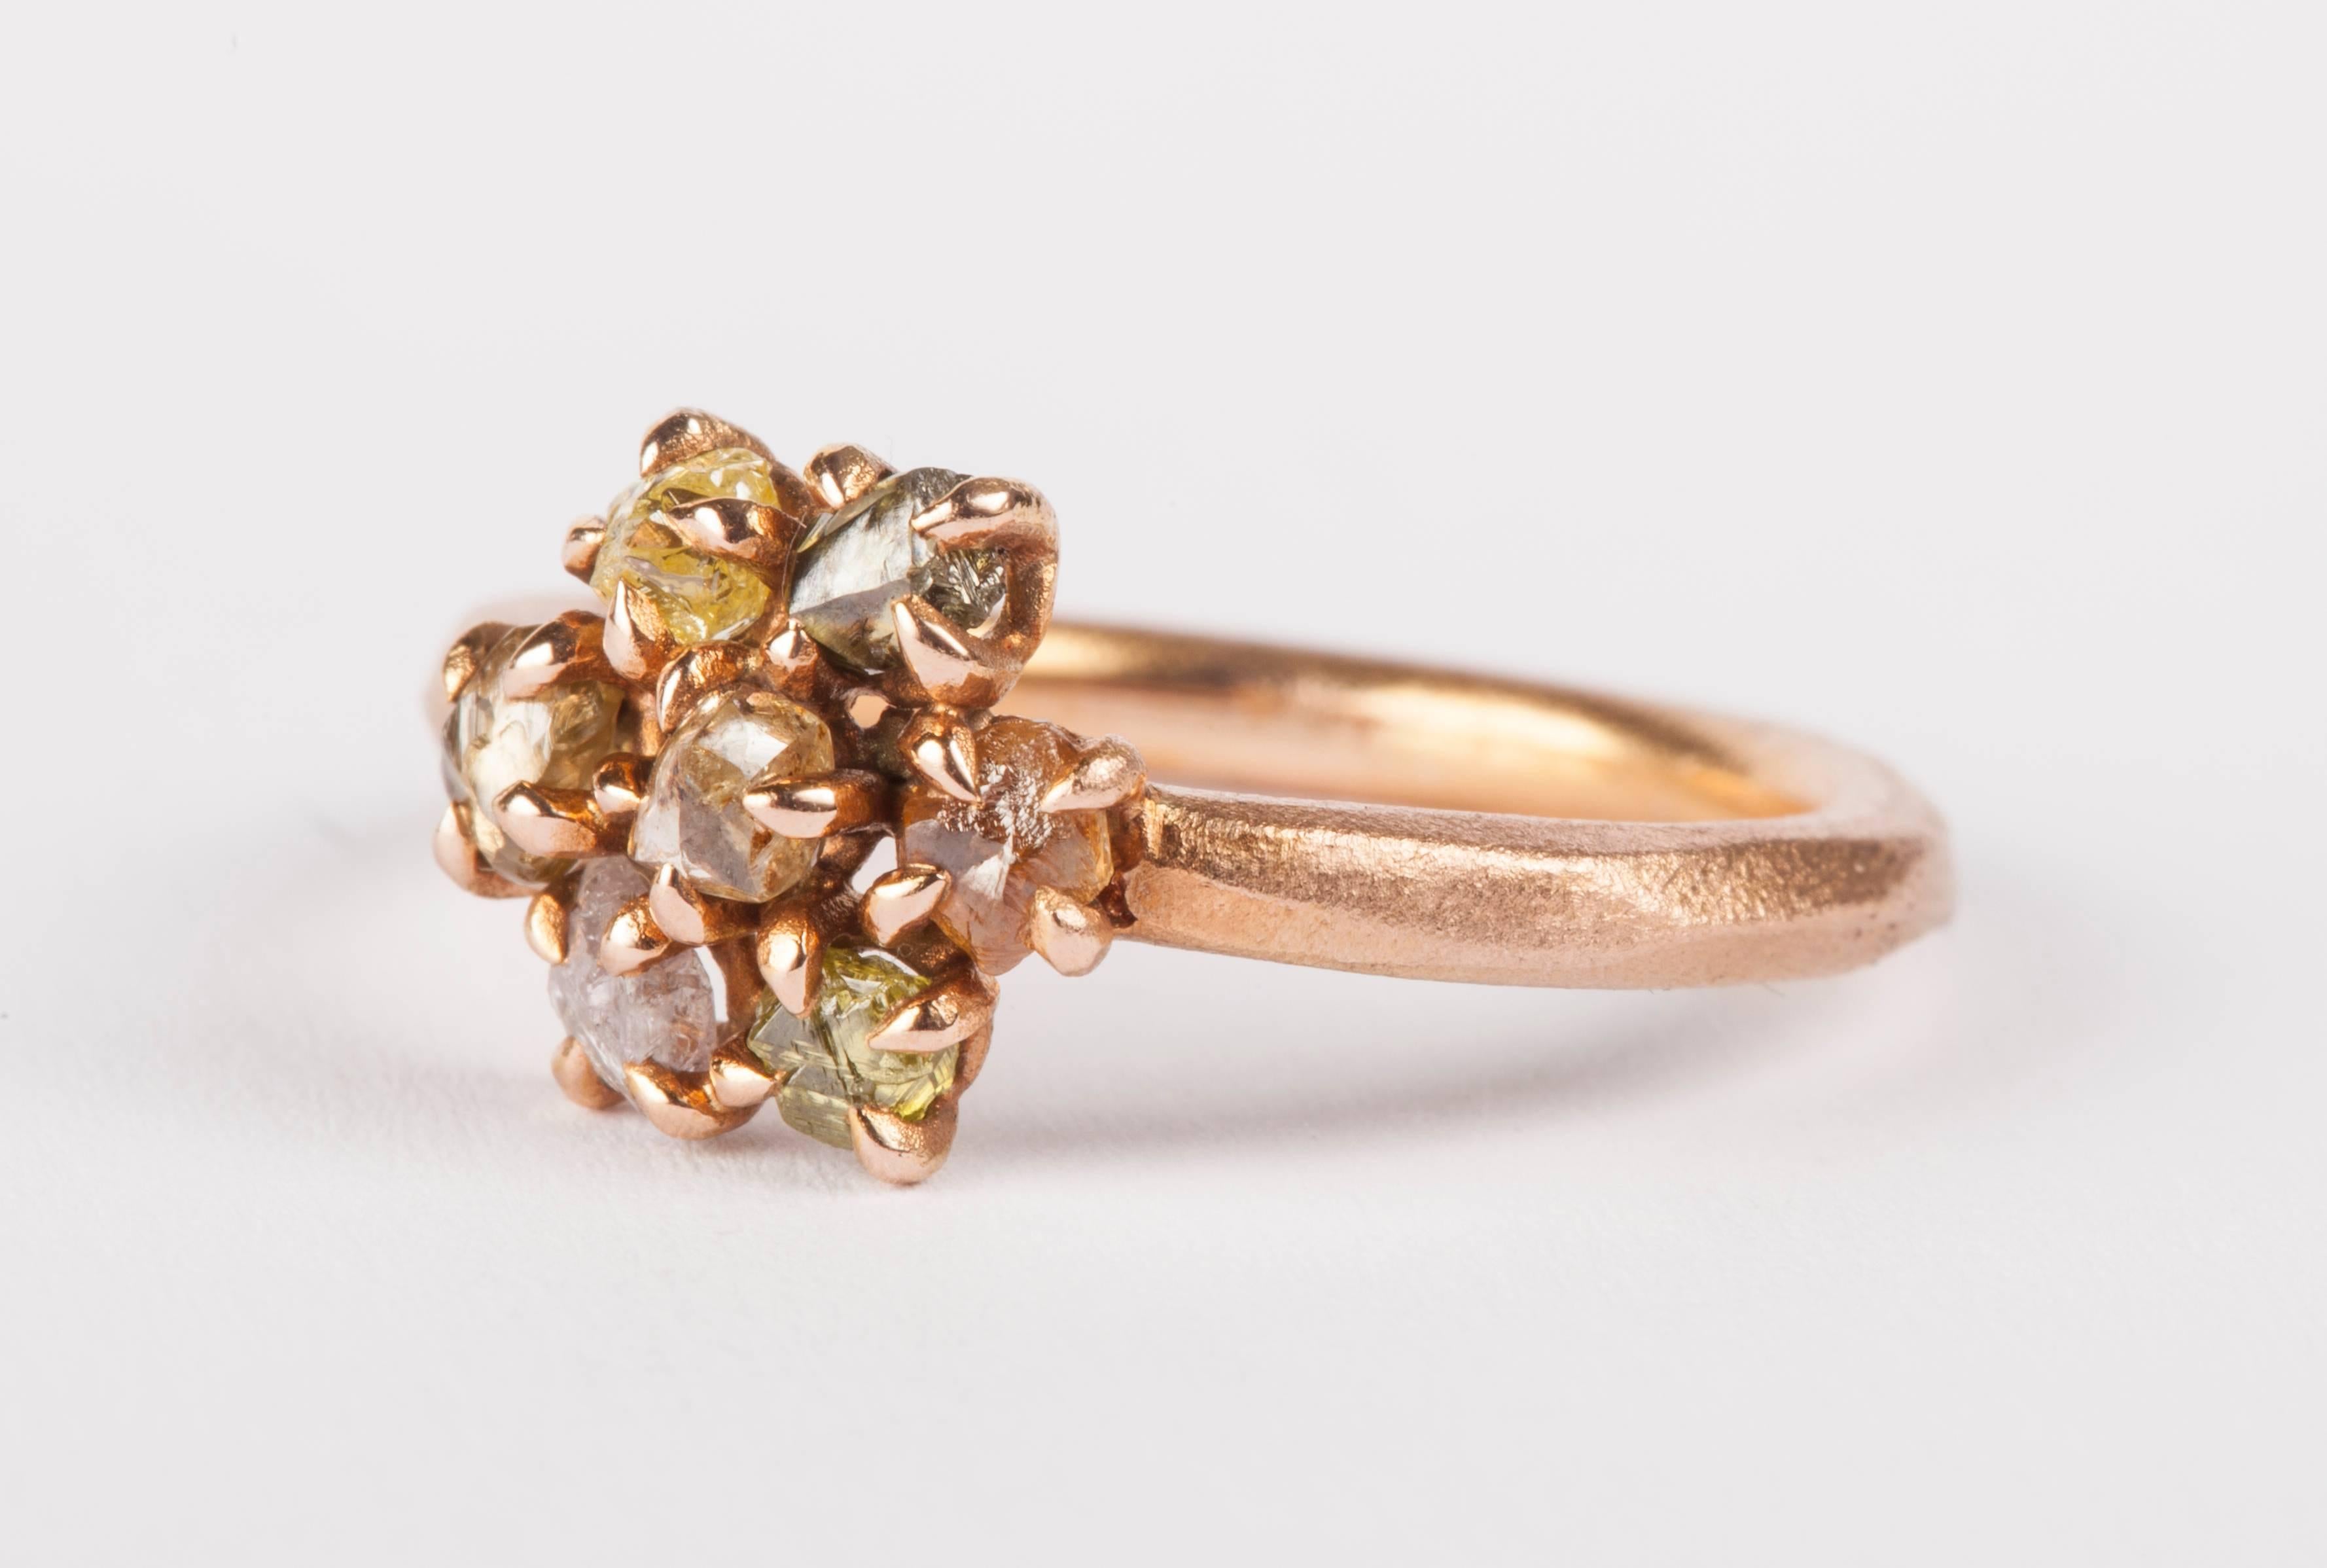 0.97 ct. Natural Fancy Colour Pink, Brown, Yellow, Green and Orange Rough Diamonds in 14K handcrafted rose gold ring.

Every rough diamond from Roughdiamonds dk has been personally handpicked by Maya Bjørnsten. The diamonds we reject are sent back